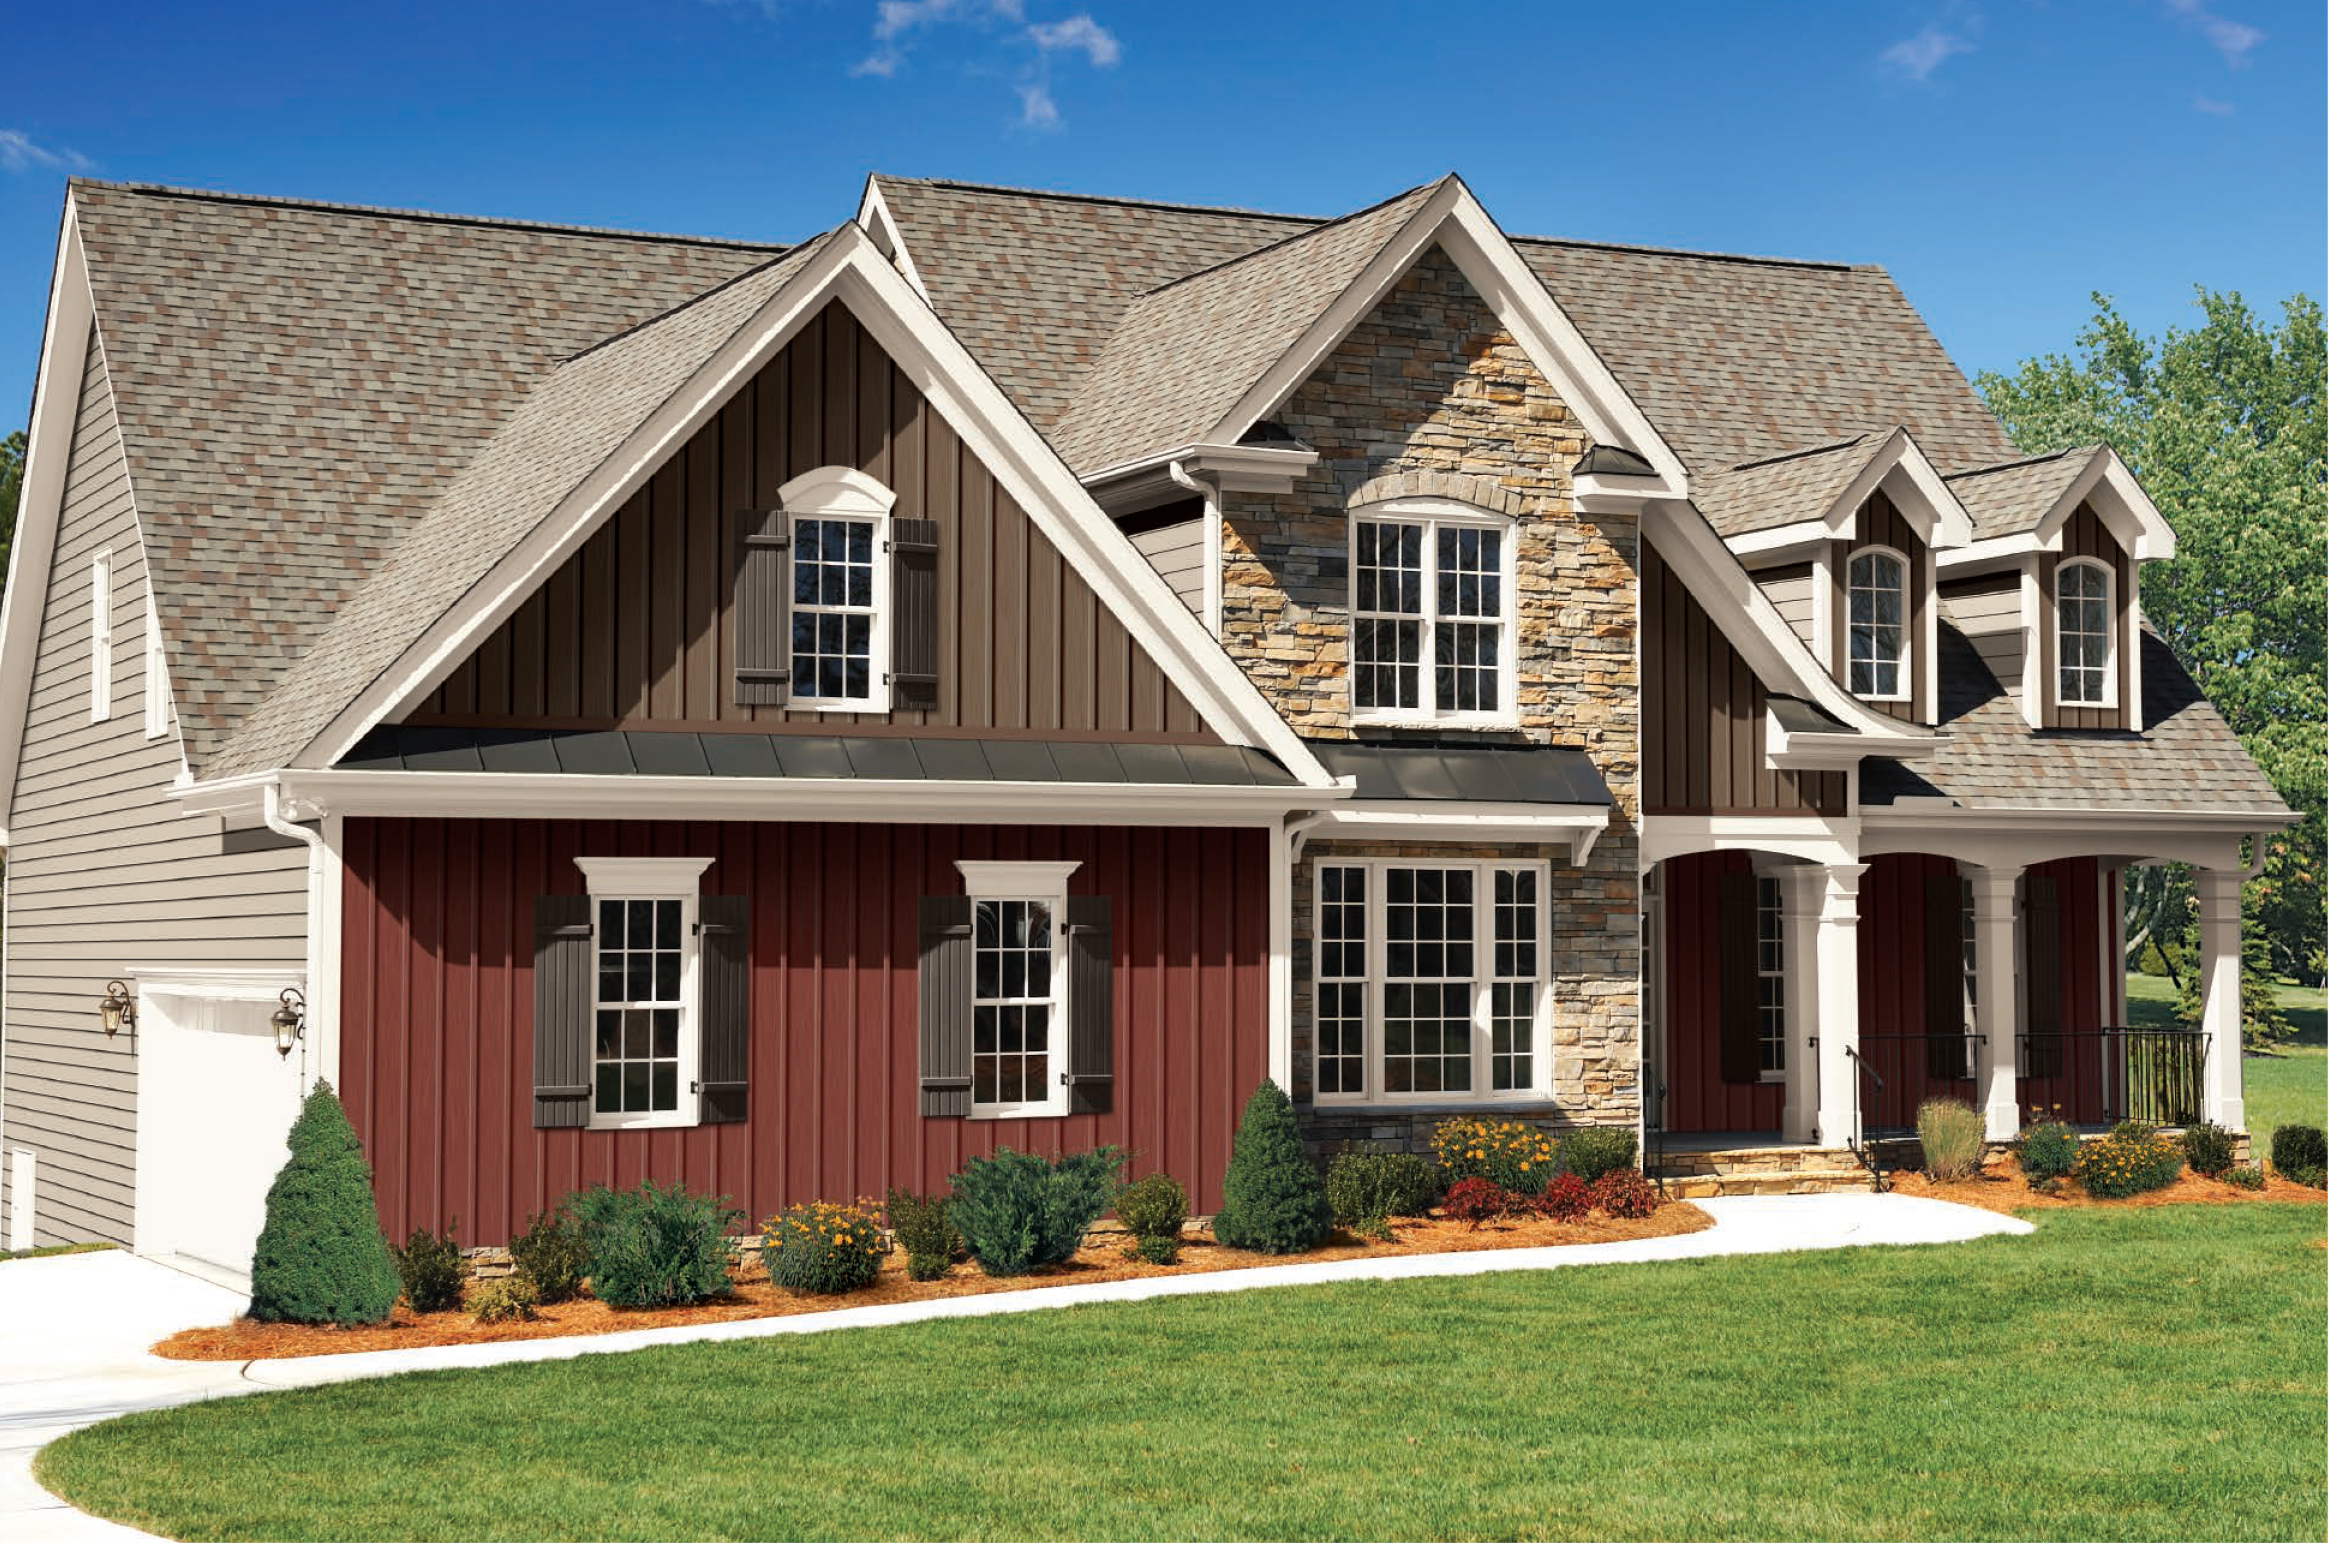 Red and brown two toned vertical siding colors with brown roofing shingles and black metal accents. White trim and columns with black metal railings. Brown stone veneer.